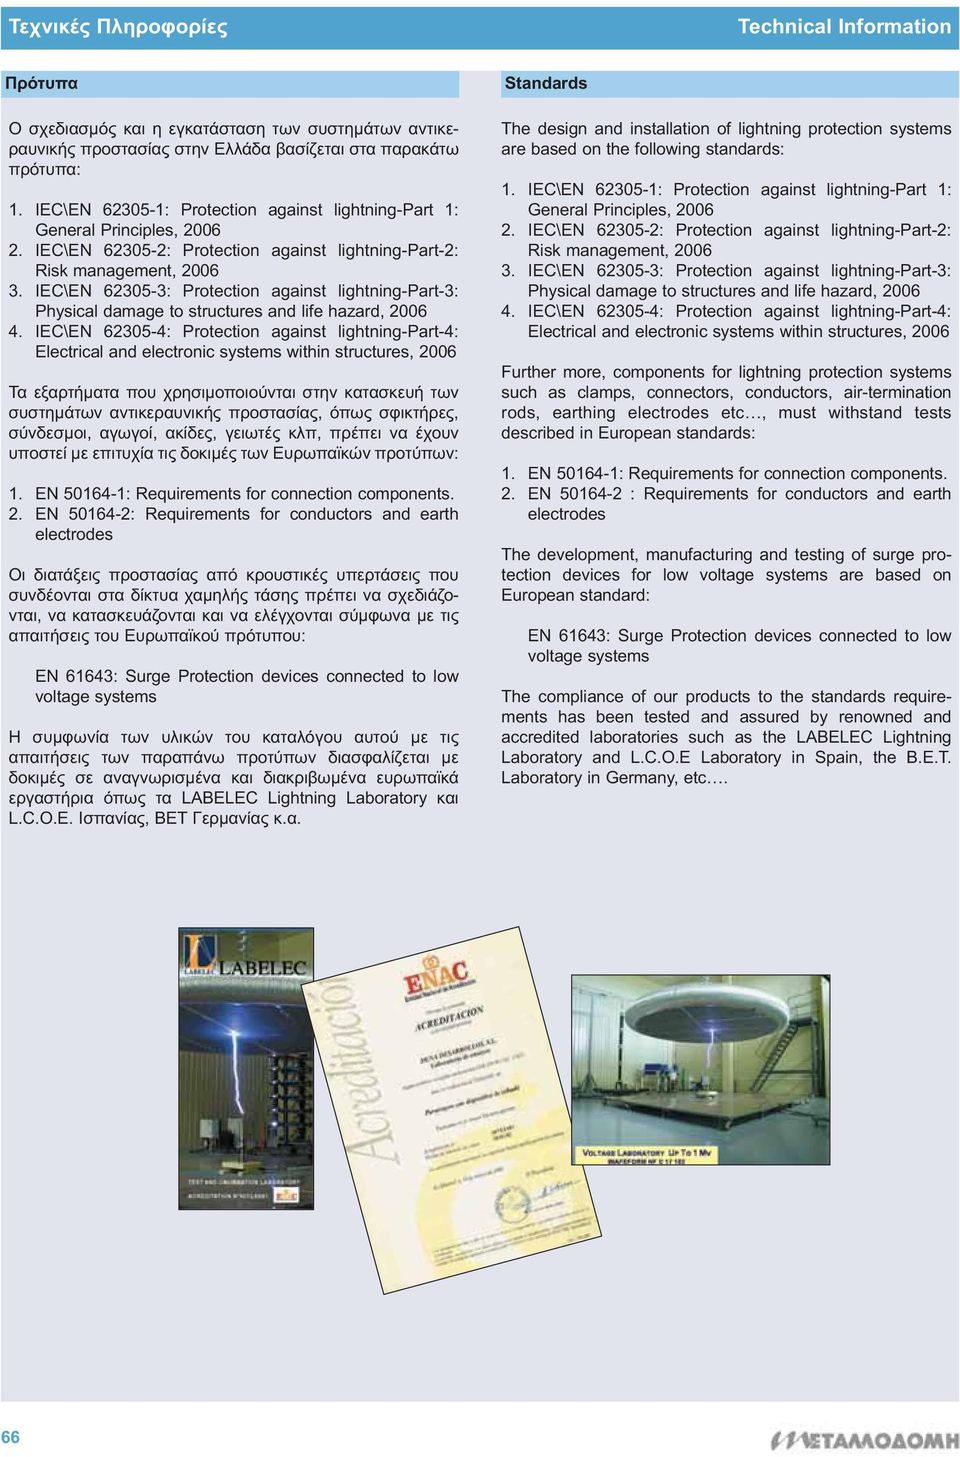 IEC\EN 62305-3: Protection against lightning-part-3: Physical damage to structures and life hazard, 2006 4.